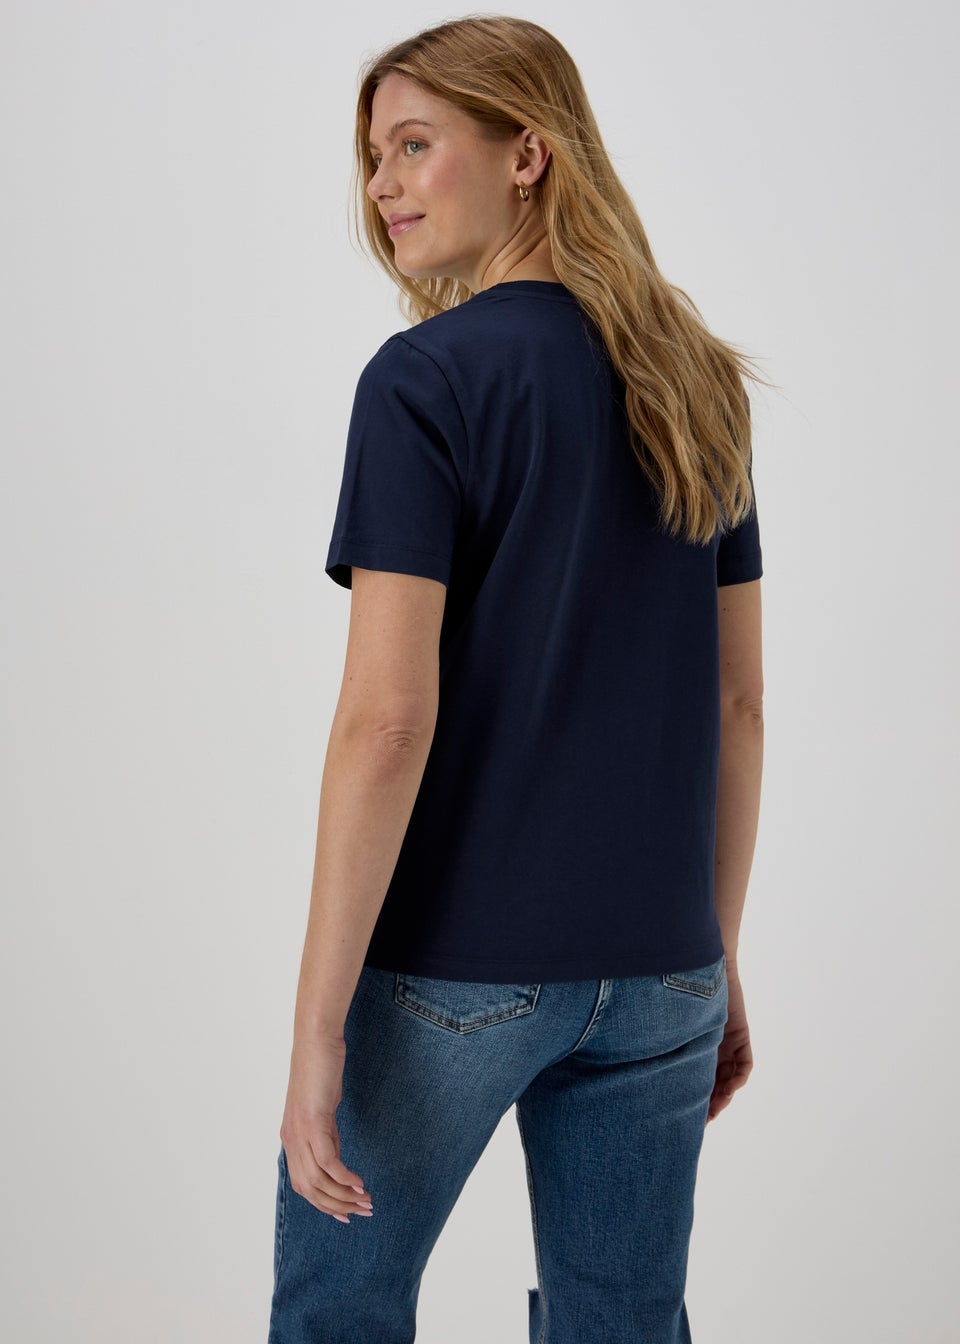 Navy Amour Graphic T-shirt